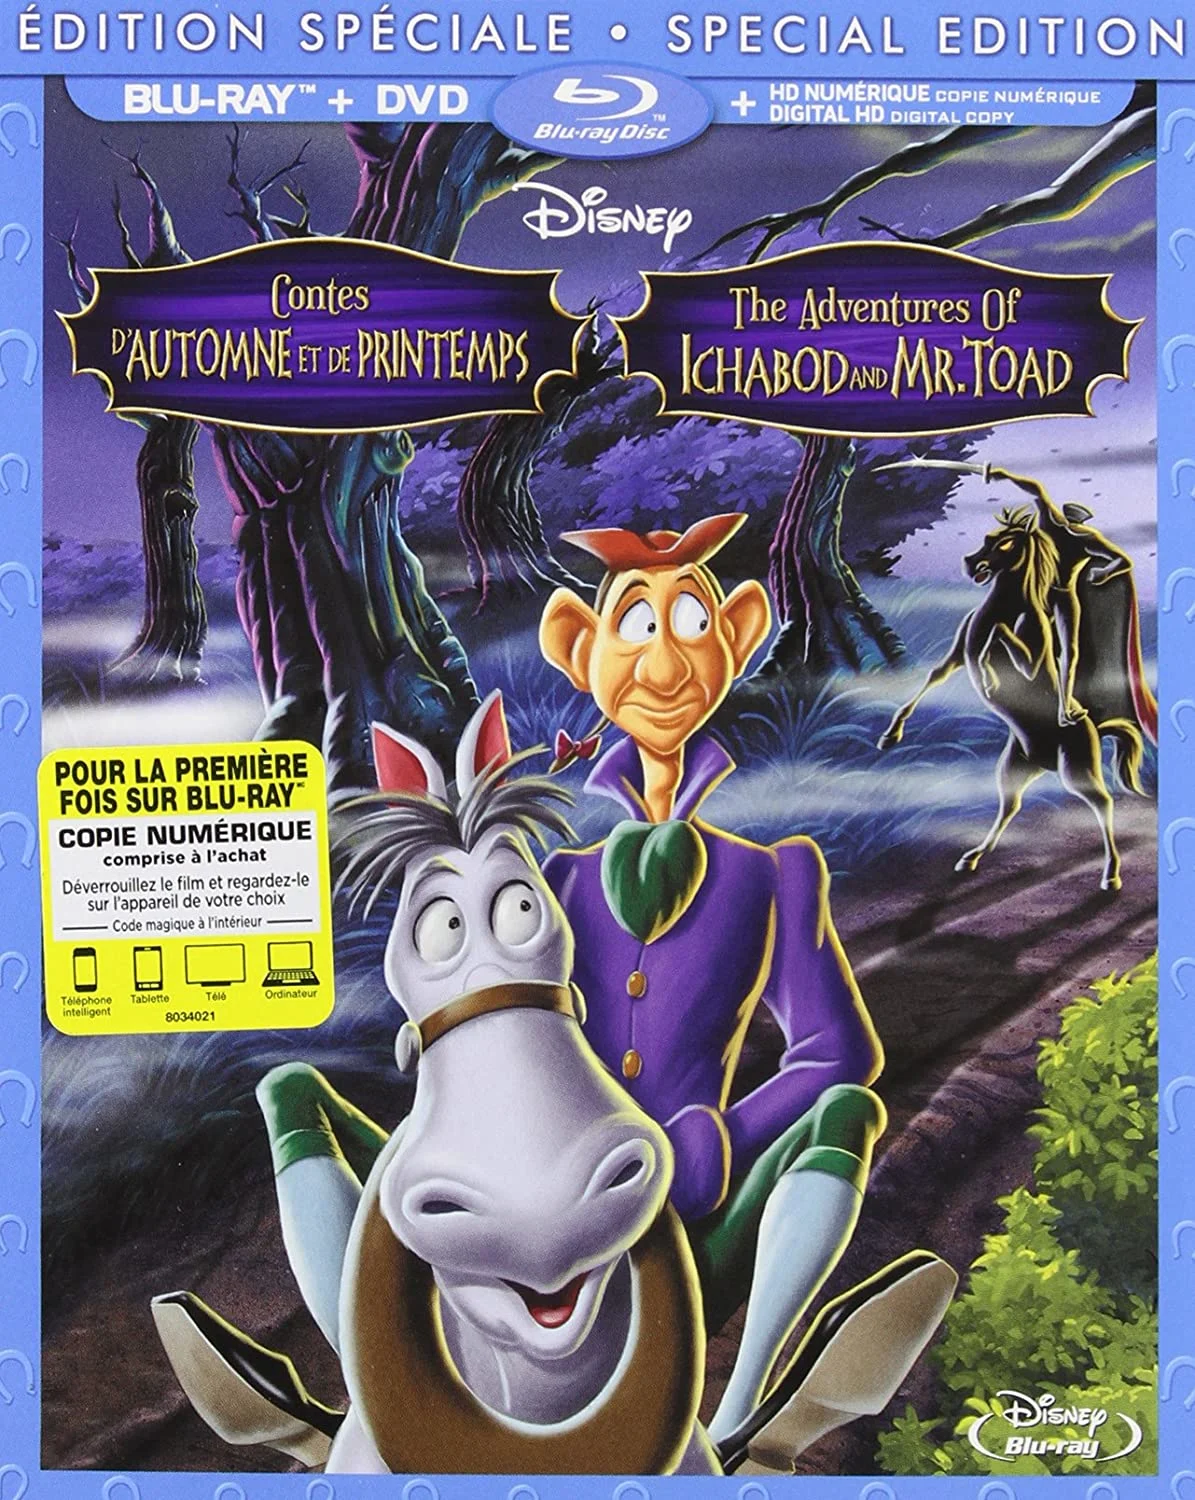 Adventures Of Ichabod And Mr. Toad Special Edition (Blu-ray) on MovieShack